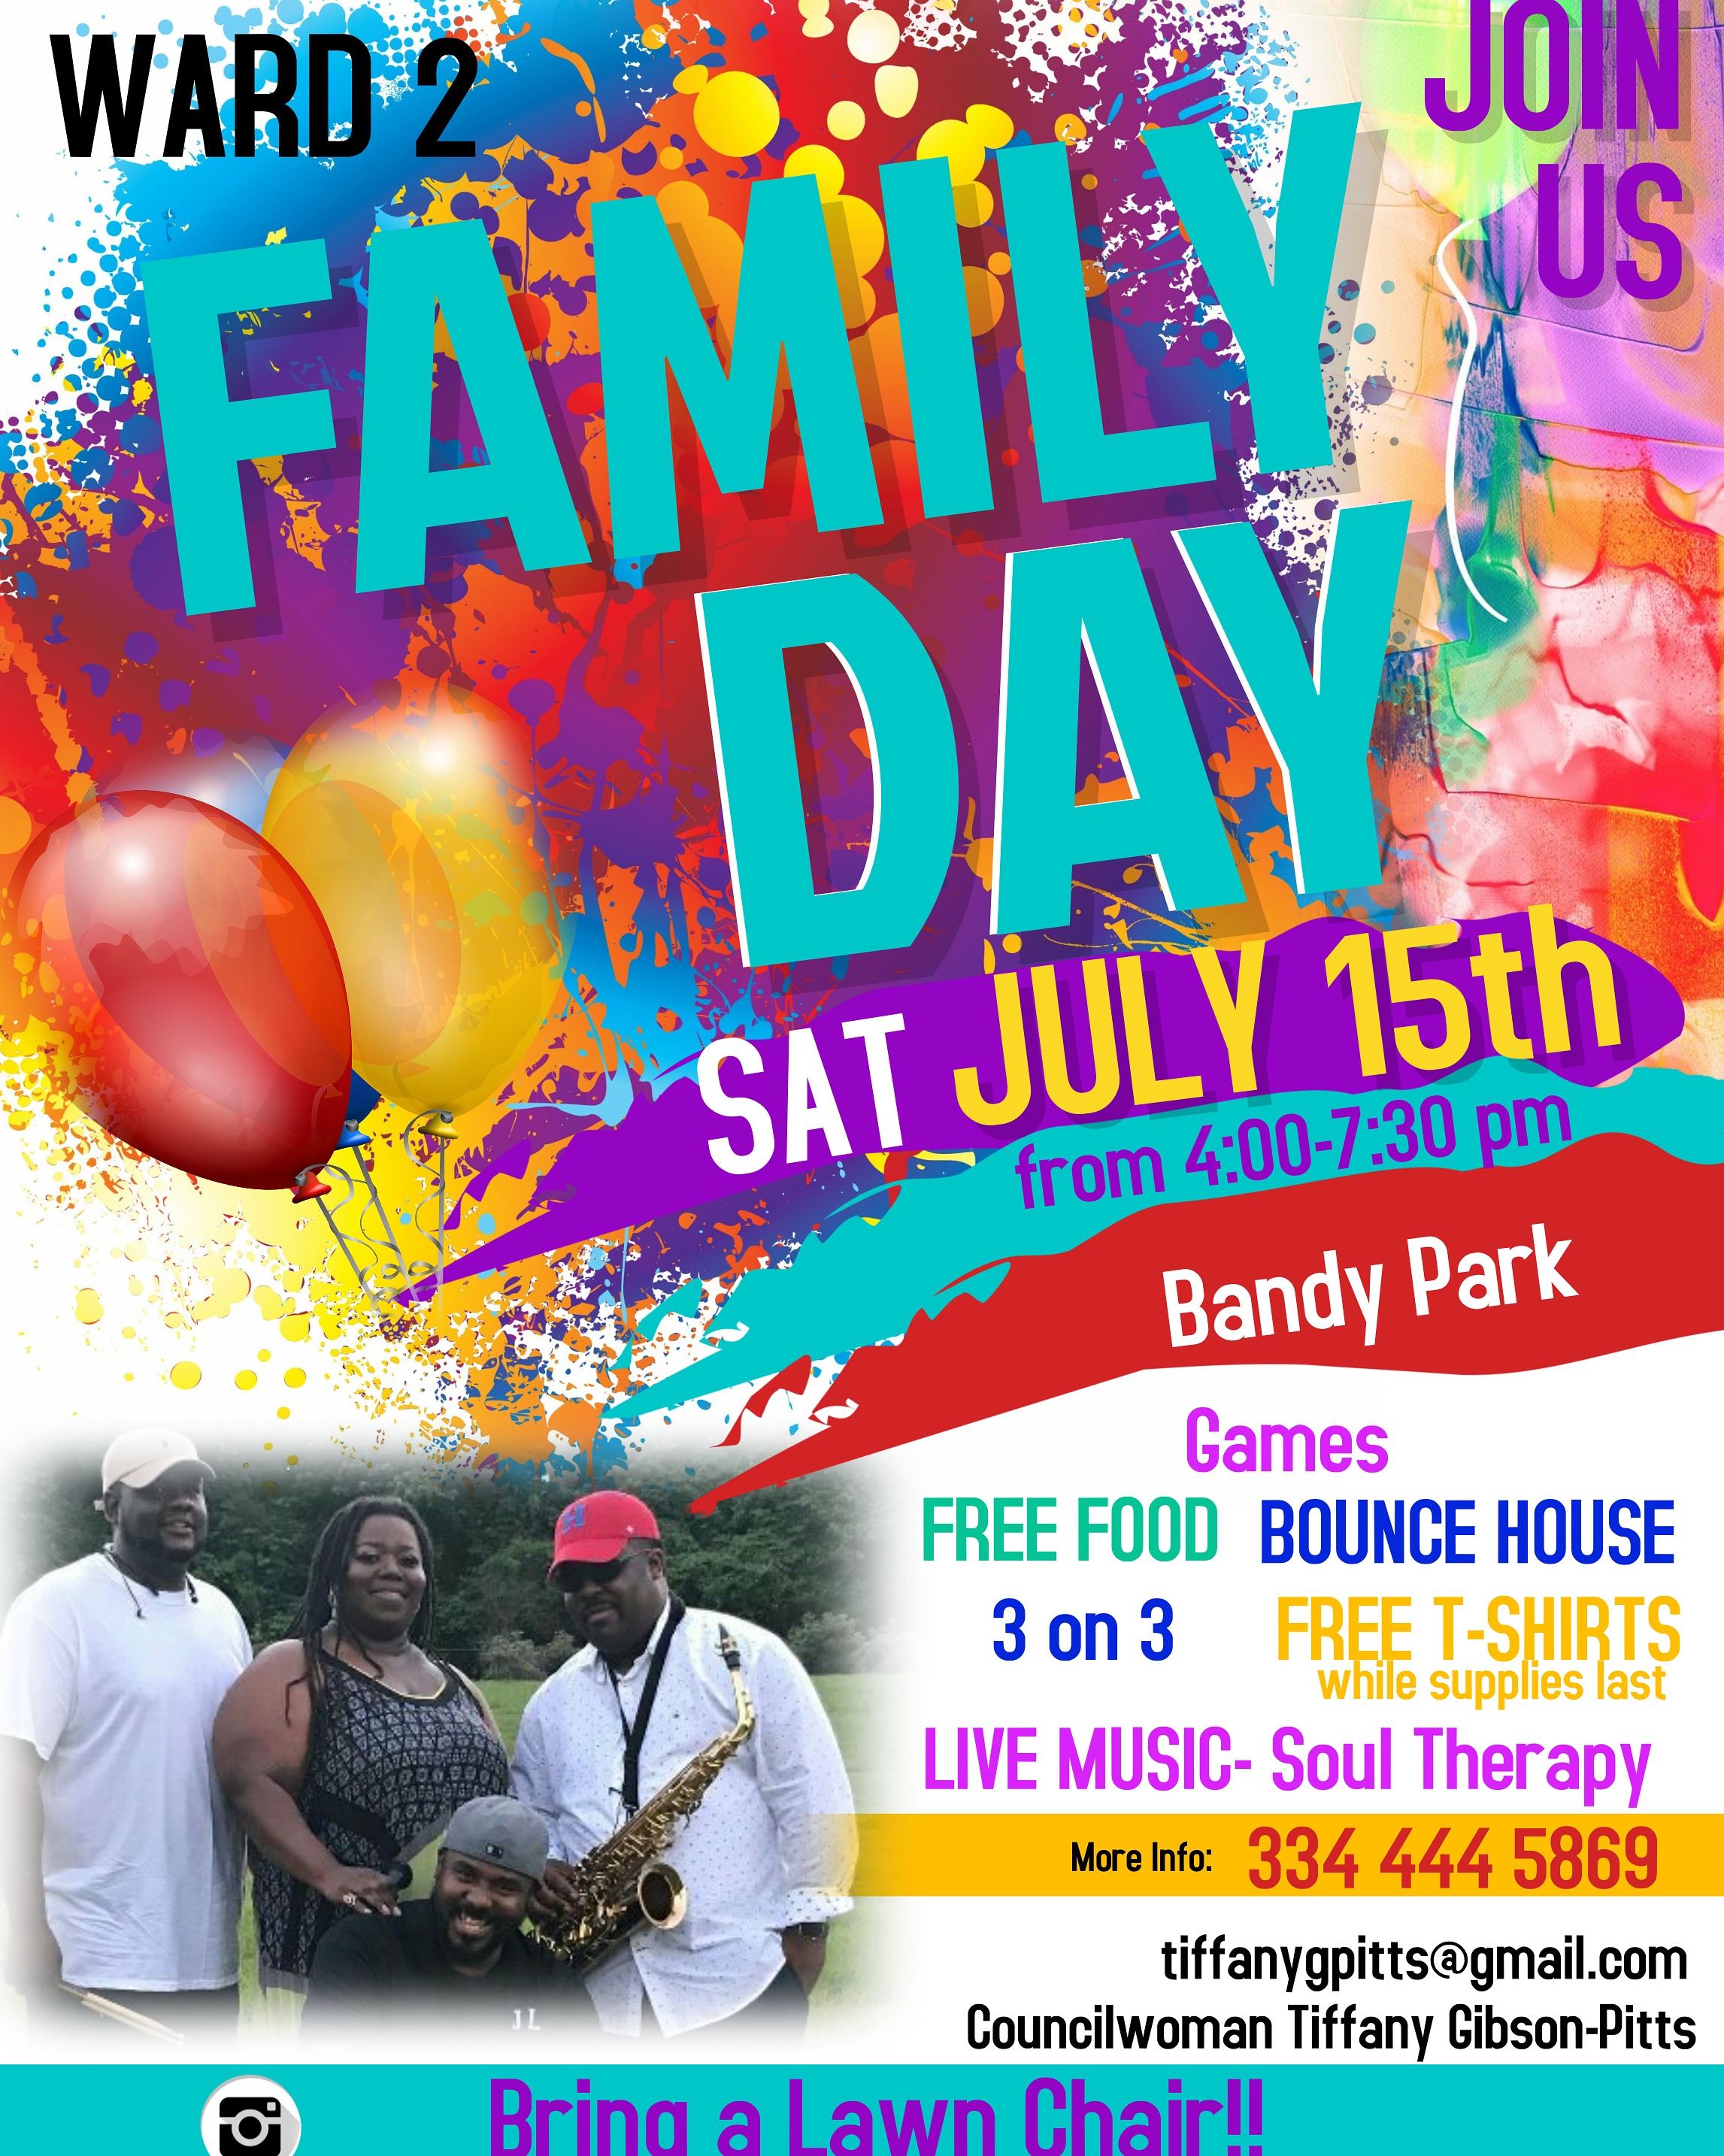 Ward 2 ‘Family Day’ event to be held July 15